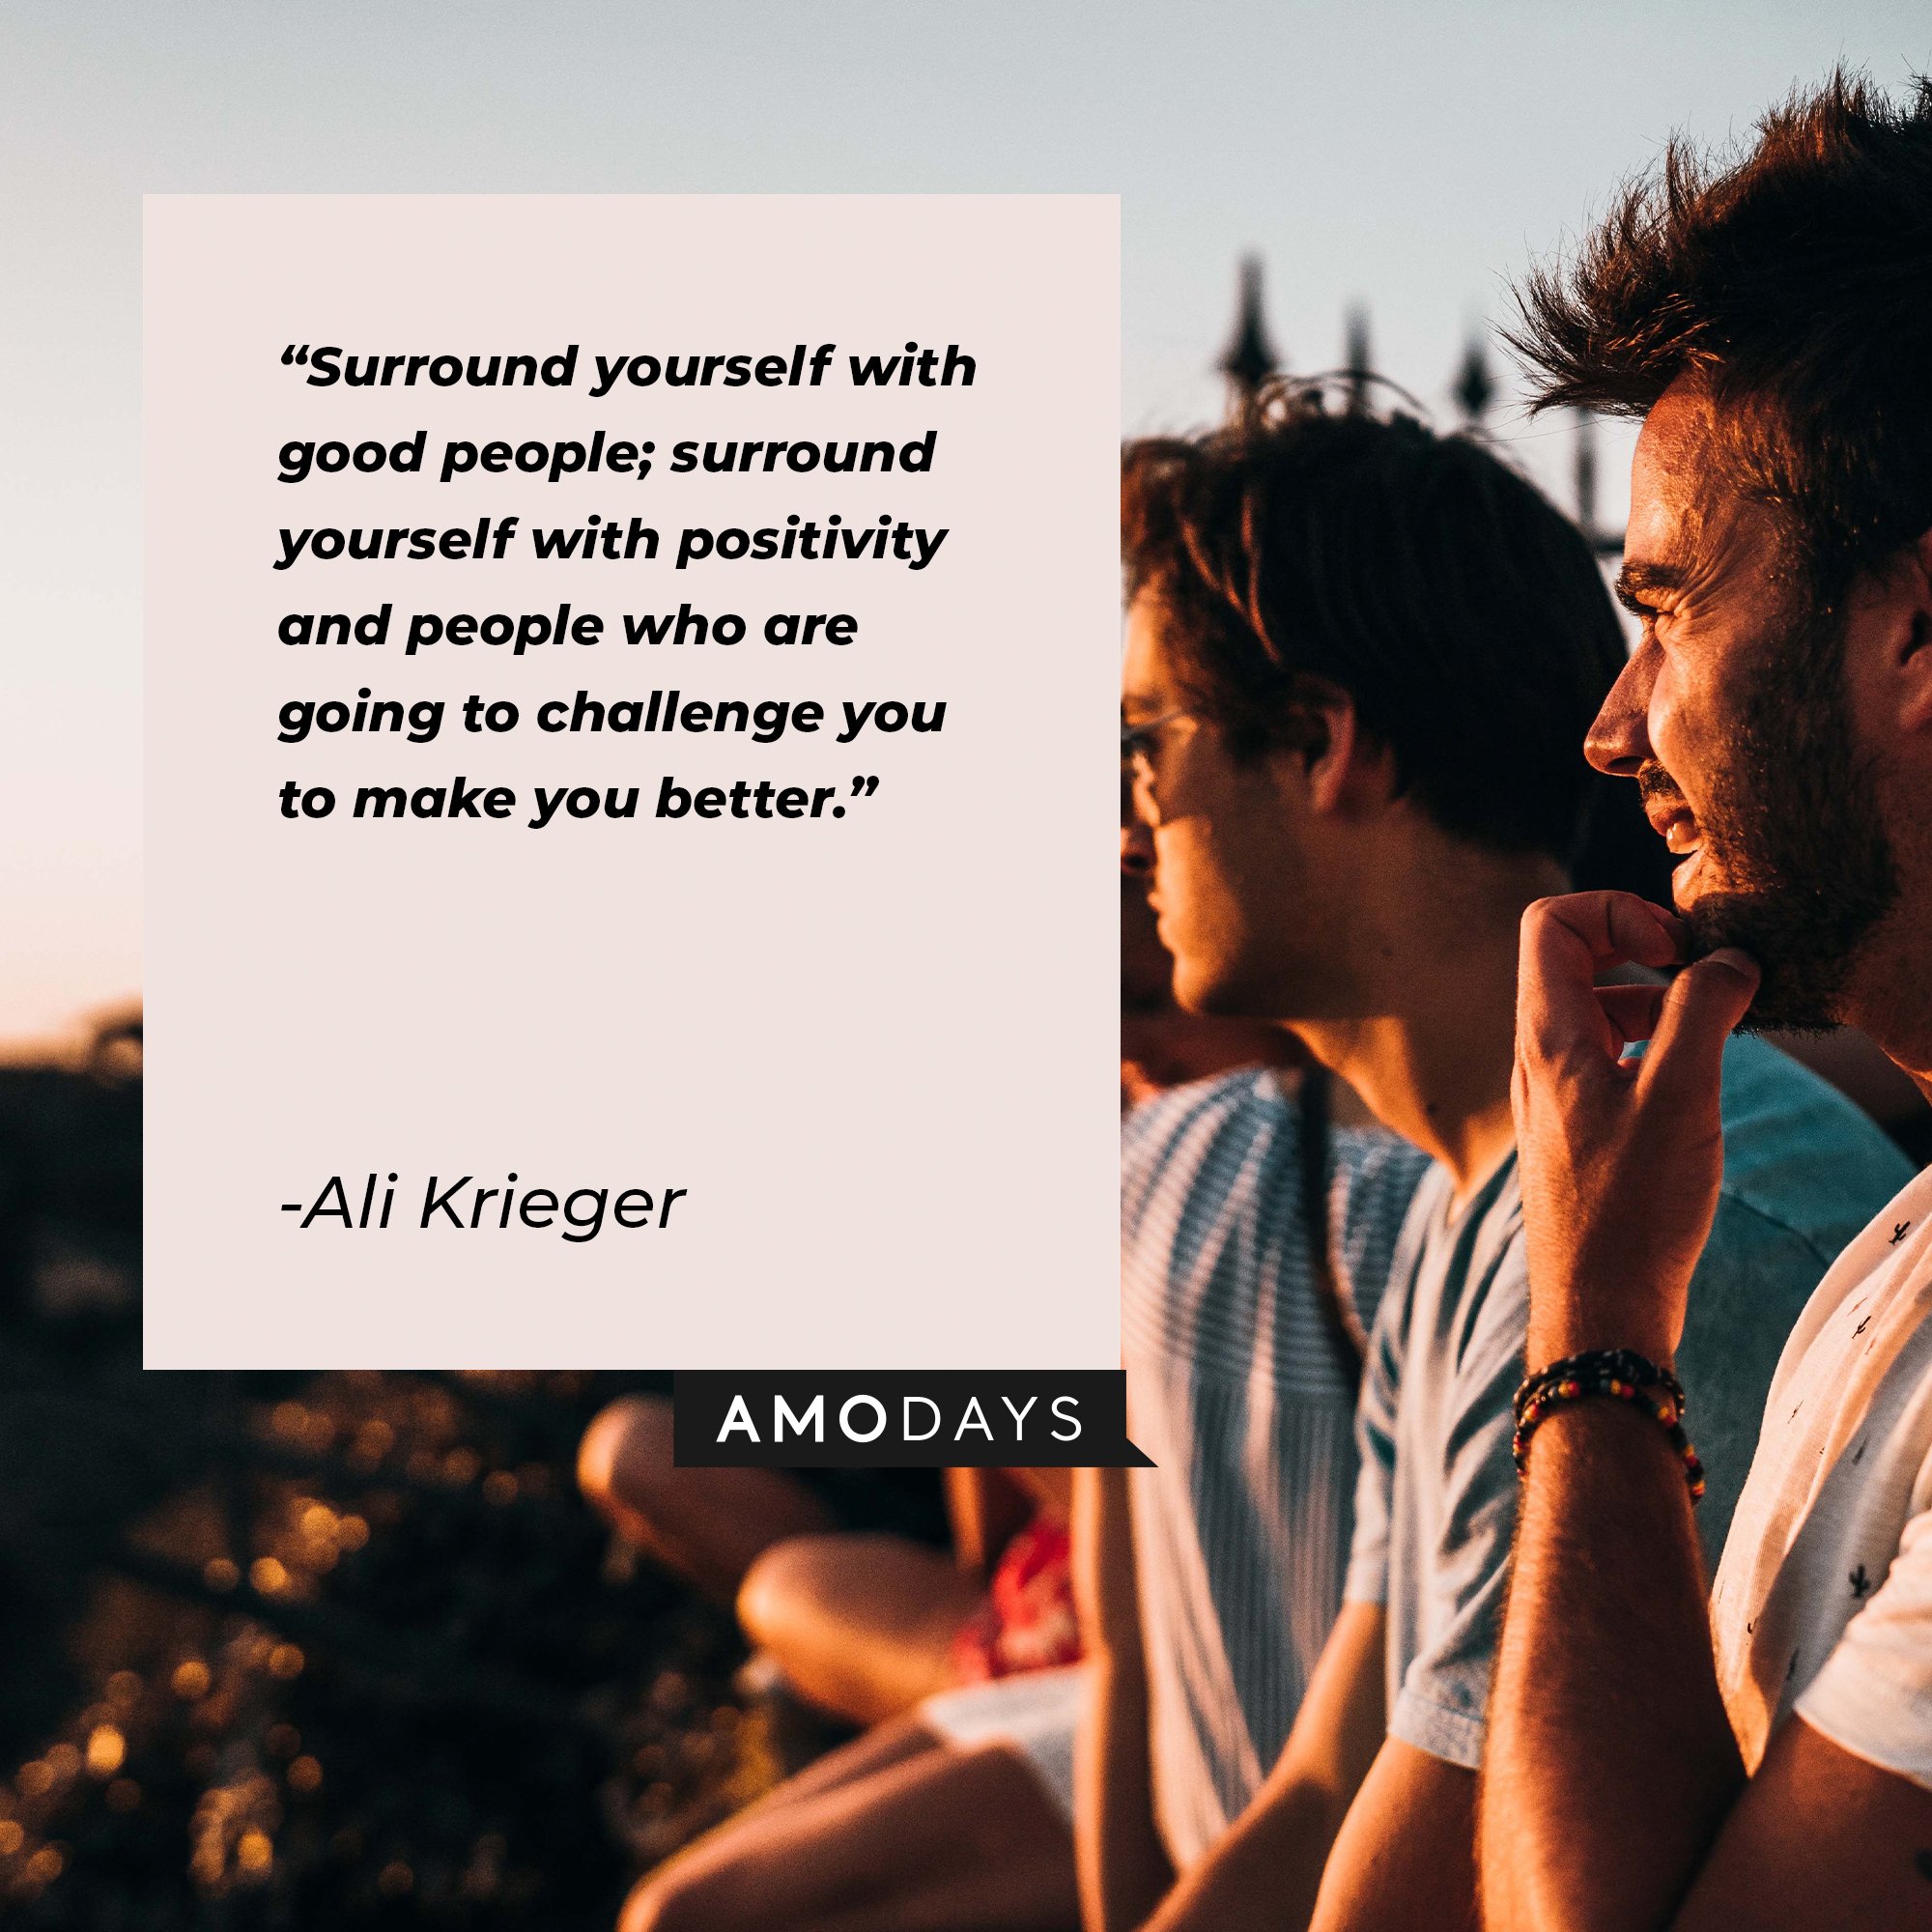 Ali Krieger’s quote: “Surround yourself with good people; surround yourself with positivity and people who are going to challenge you to make you better.” | Image: AmoDays